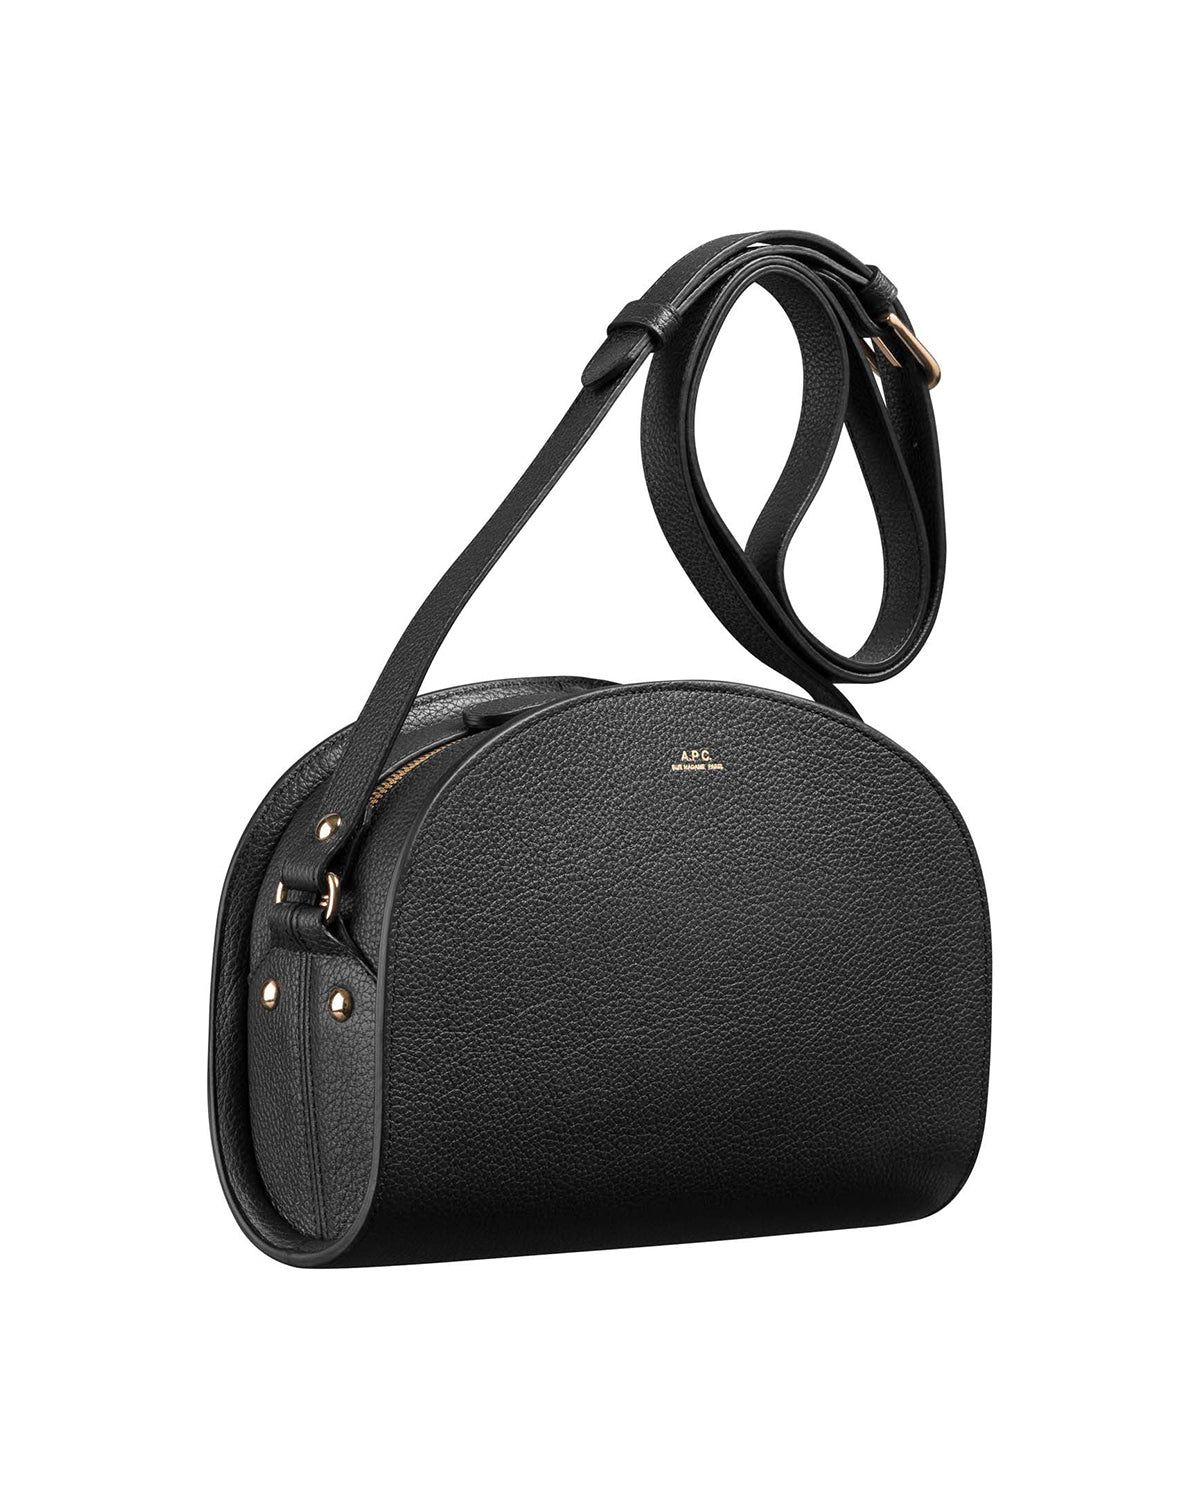 A.P.C. Sac Demi Lune Black Grained Leather Bags Women